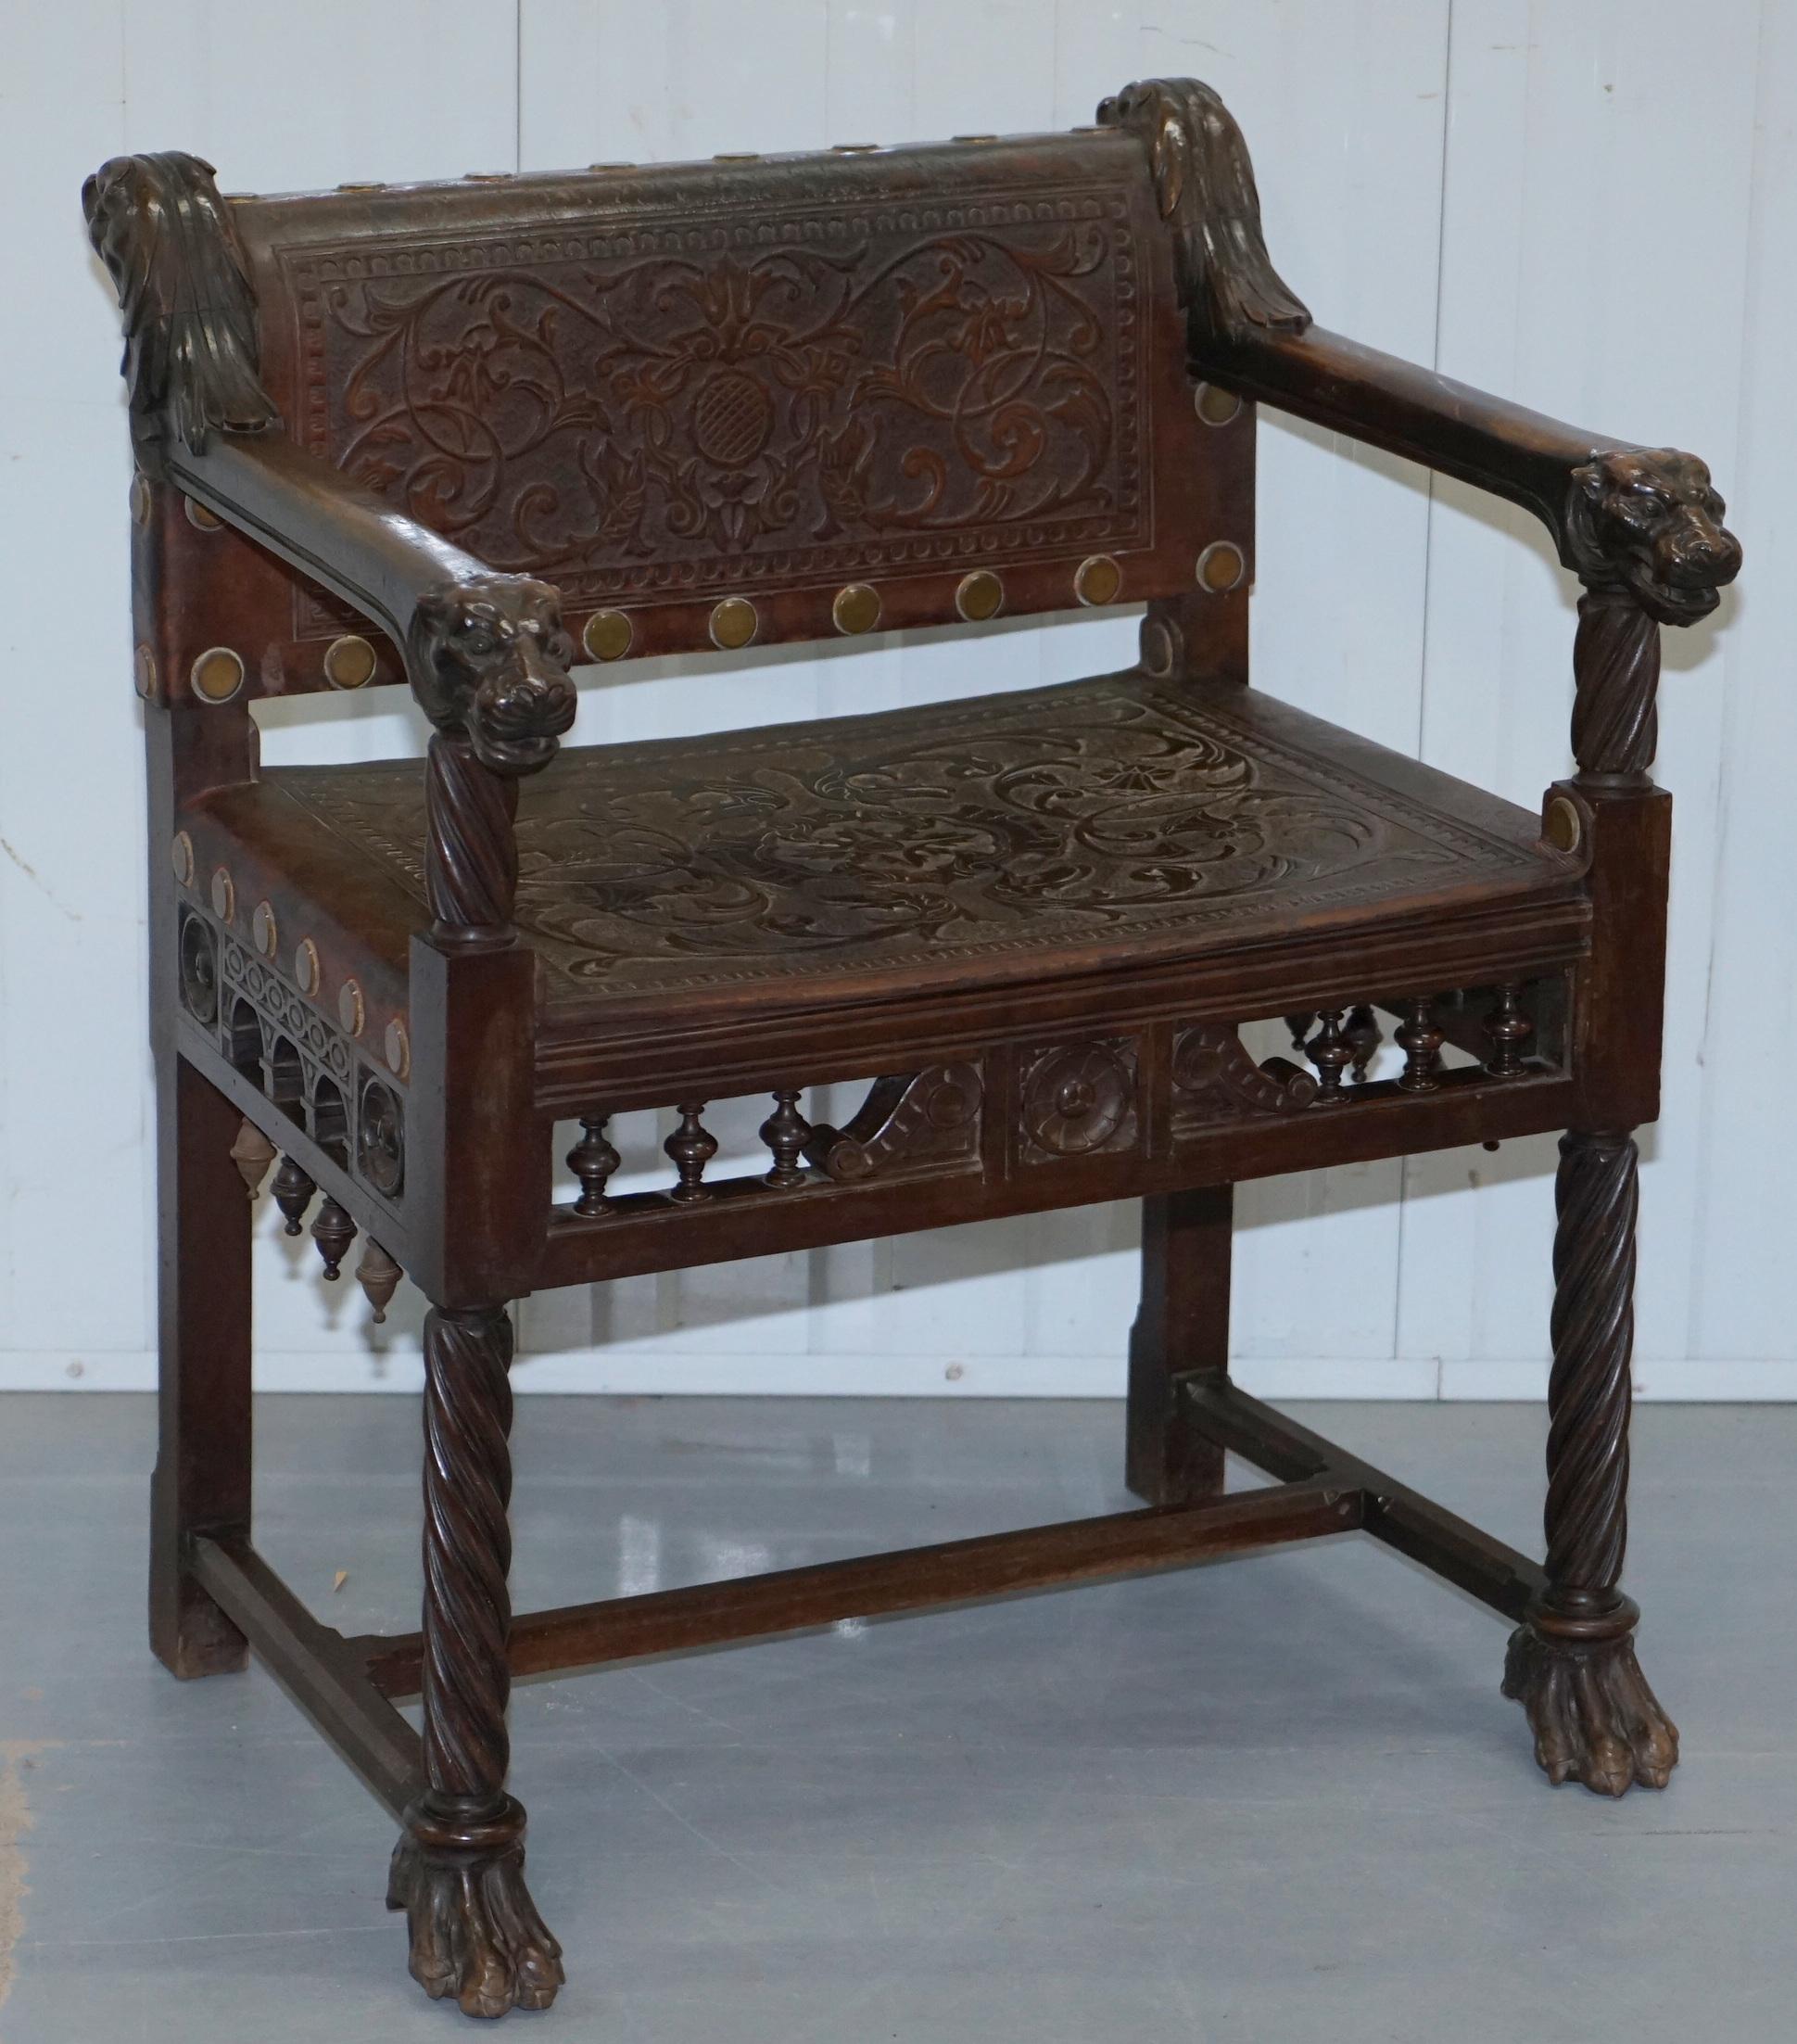 Wimbledon-Furniture

Wimbledon-Furniture is delighted to offer for auction this very rare pair of circa 1840 solid hand carved walnut with Lion head and hairy paw detailing Italian armchairs 

Please note the delivery fee listed is just a guide,